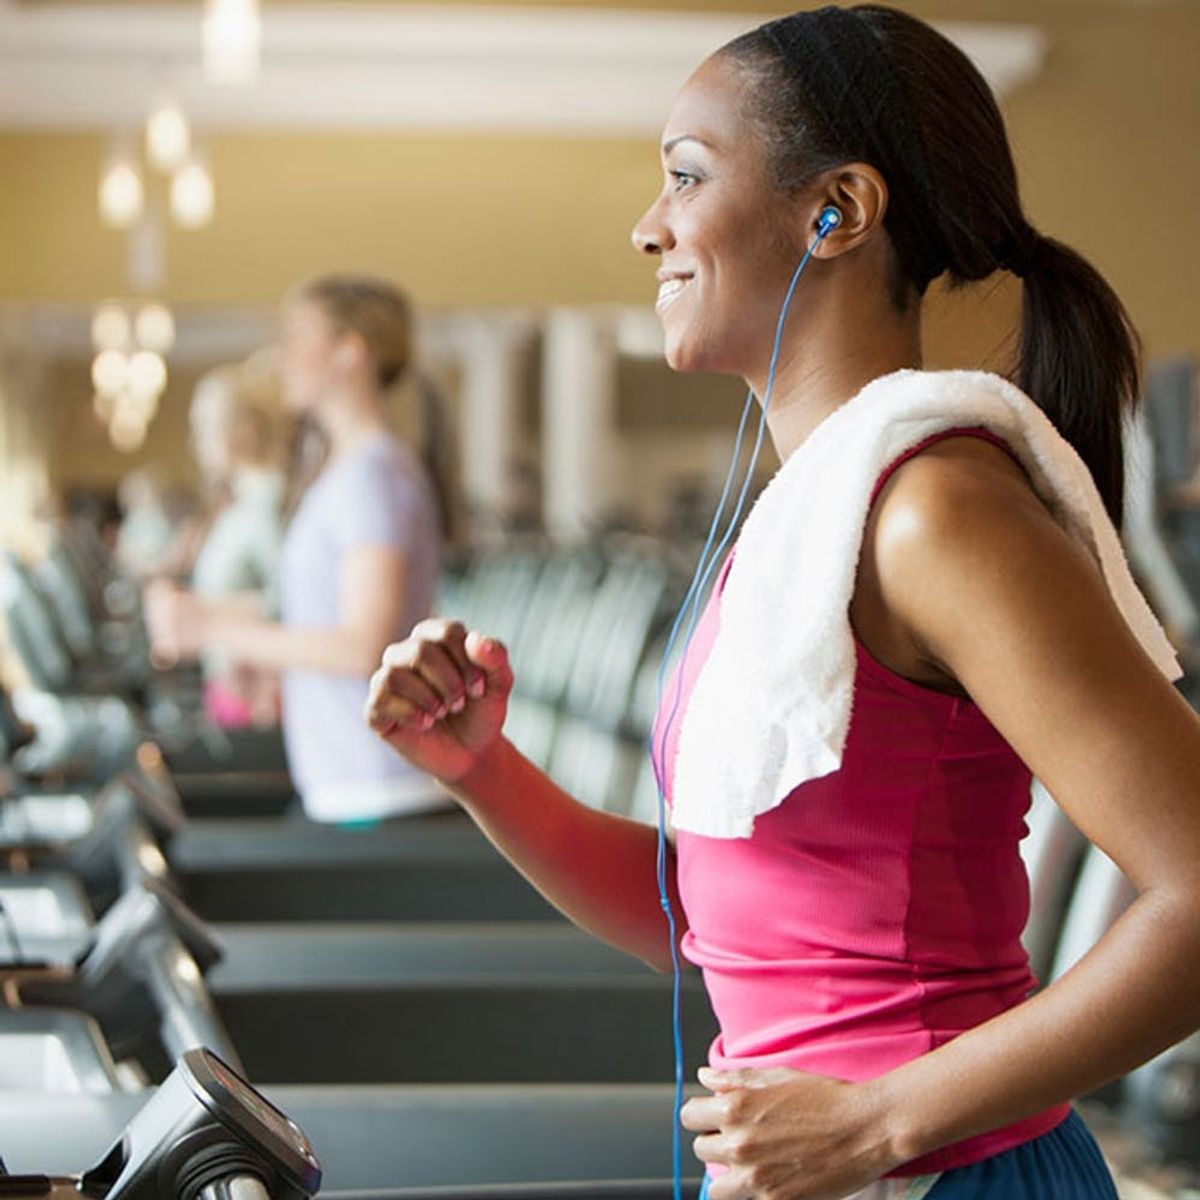 6 Things to Consider Before Ditching Your Gym Membership